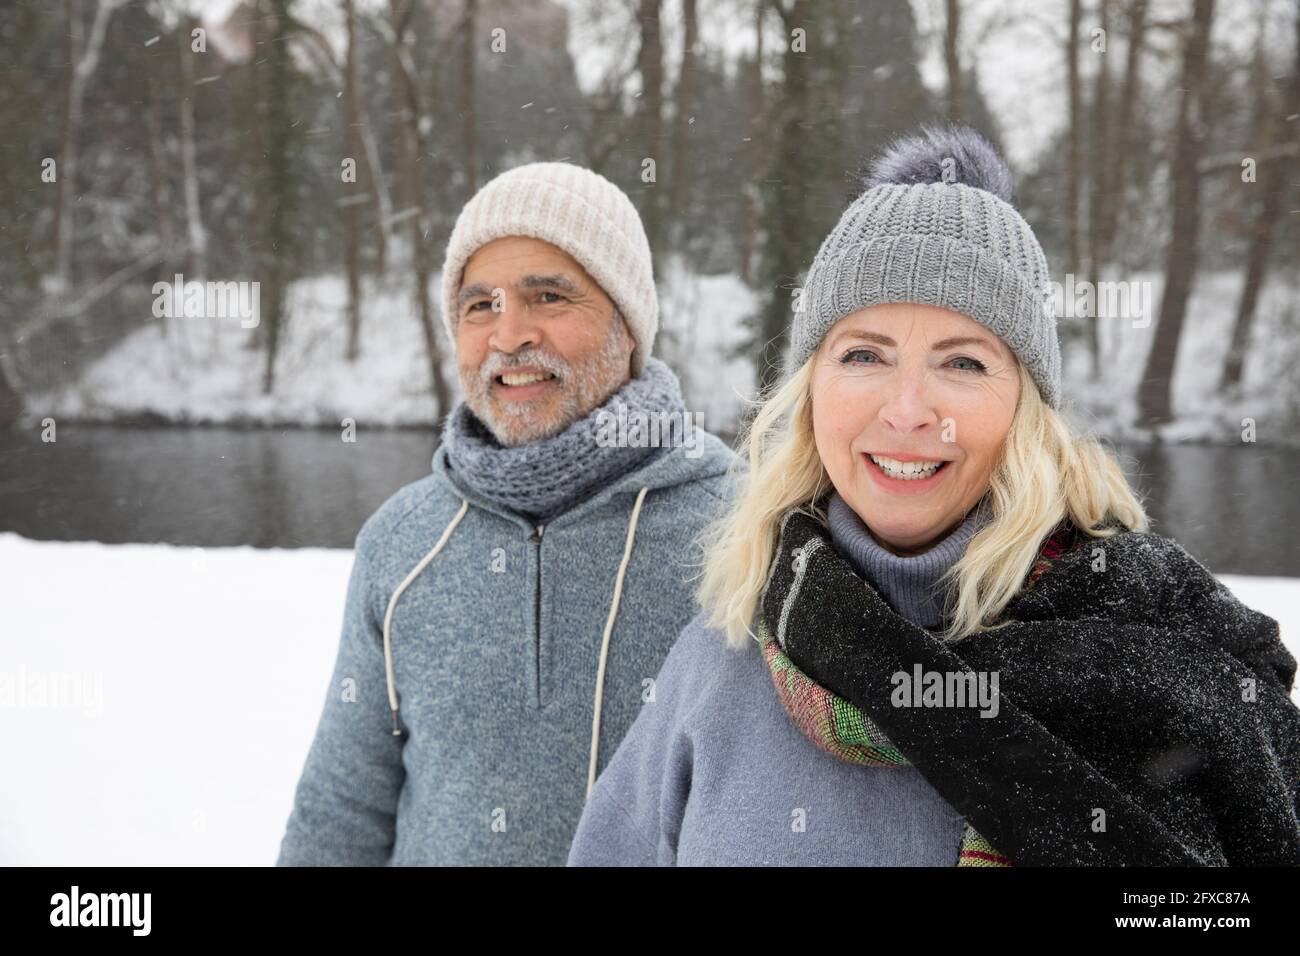 Smiling senior woman with man at park during winter Stock Photo